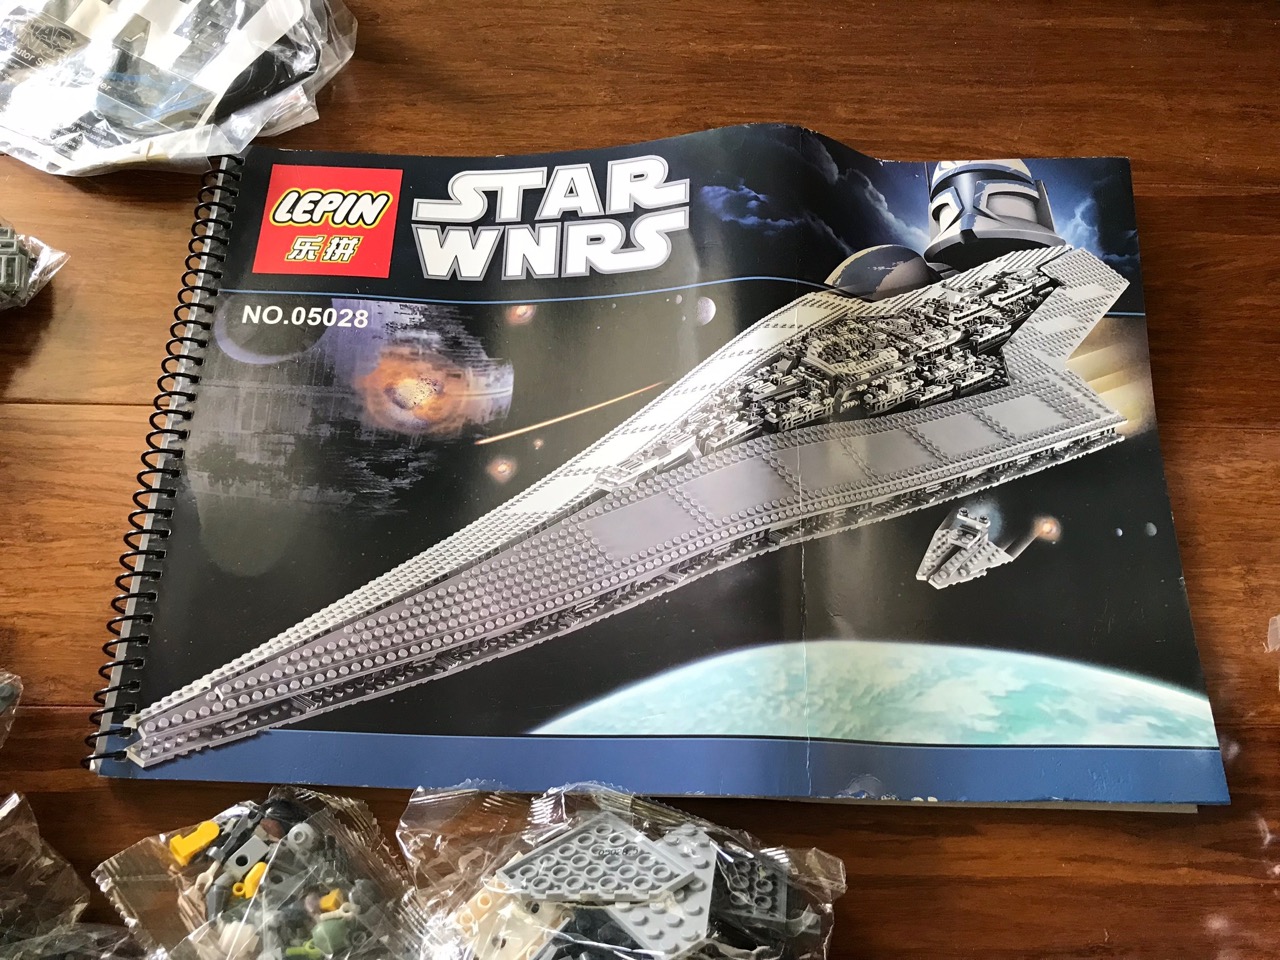 Fake 'Lepin' brand Lego arrived from China